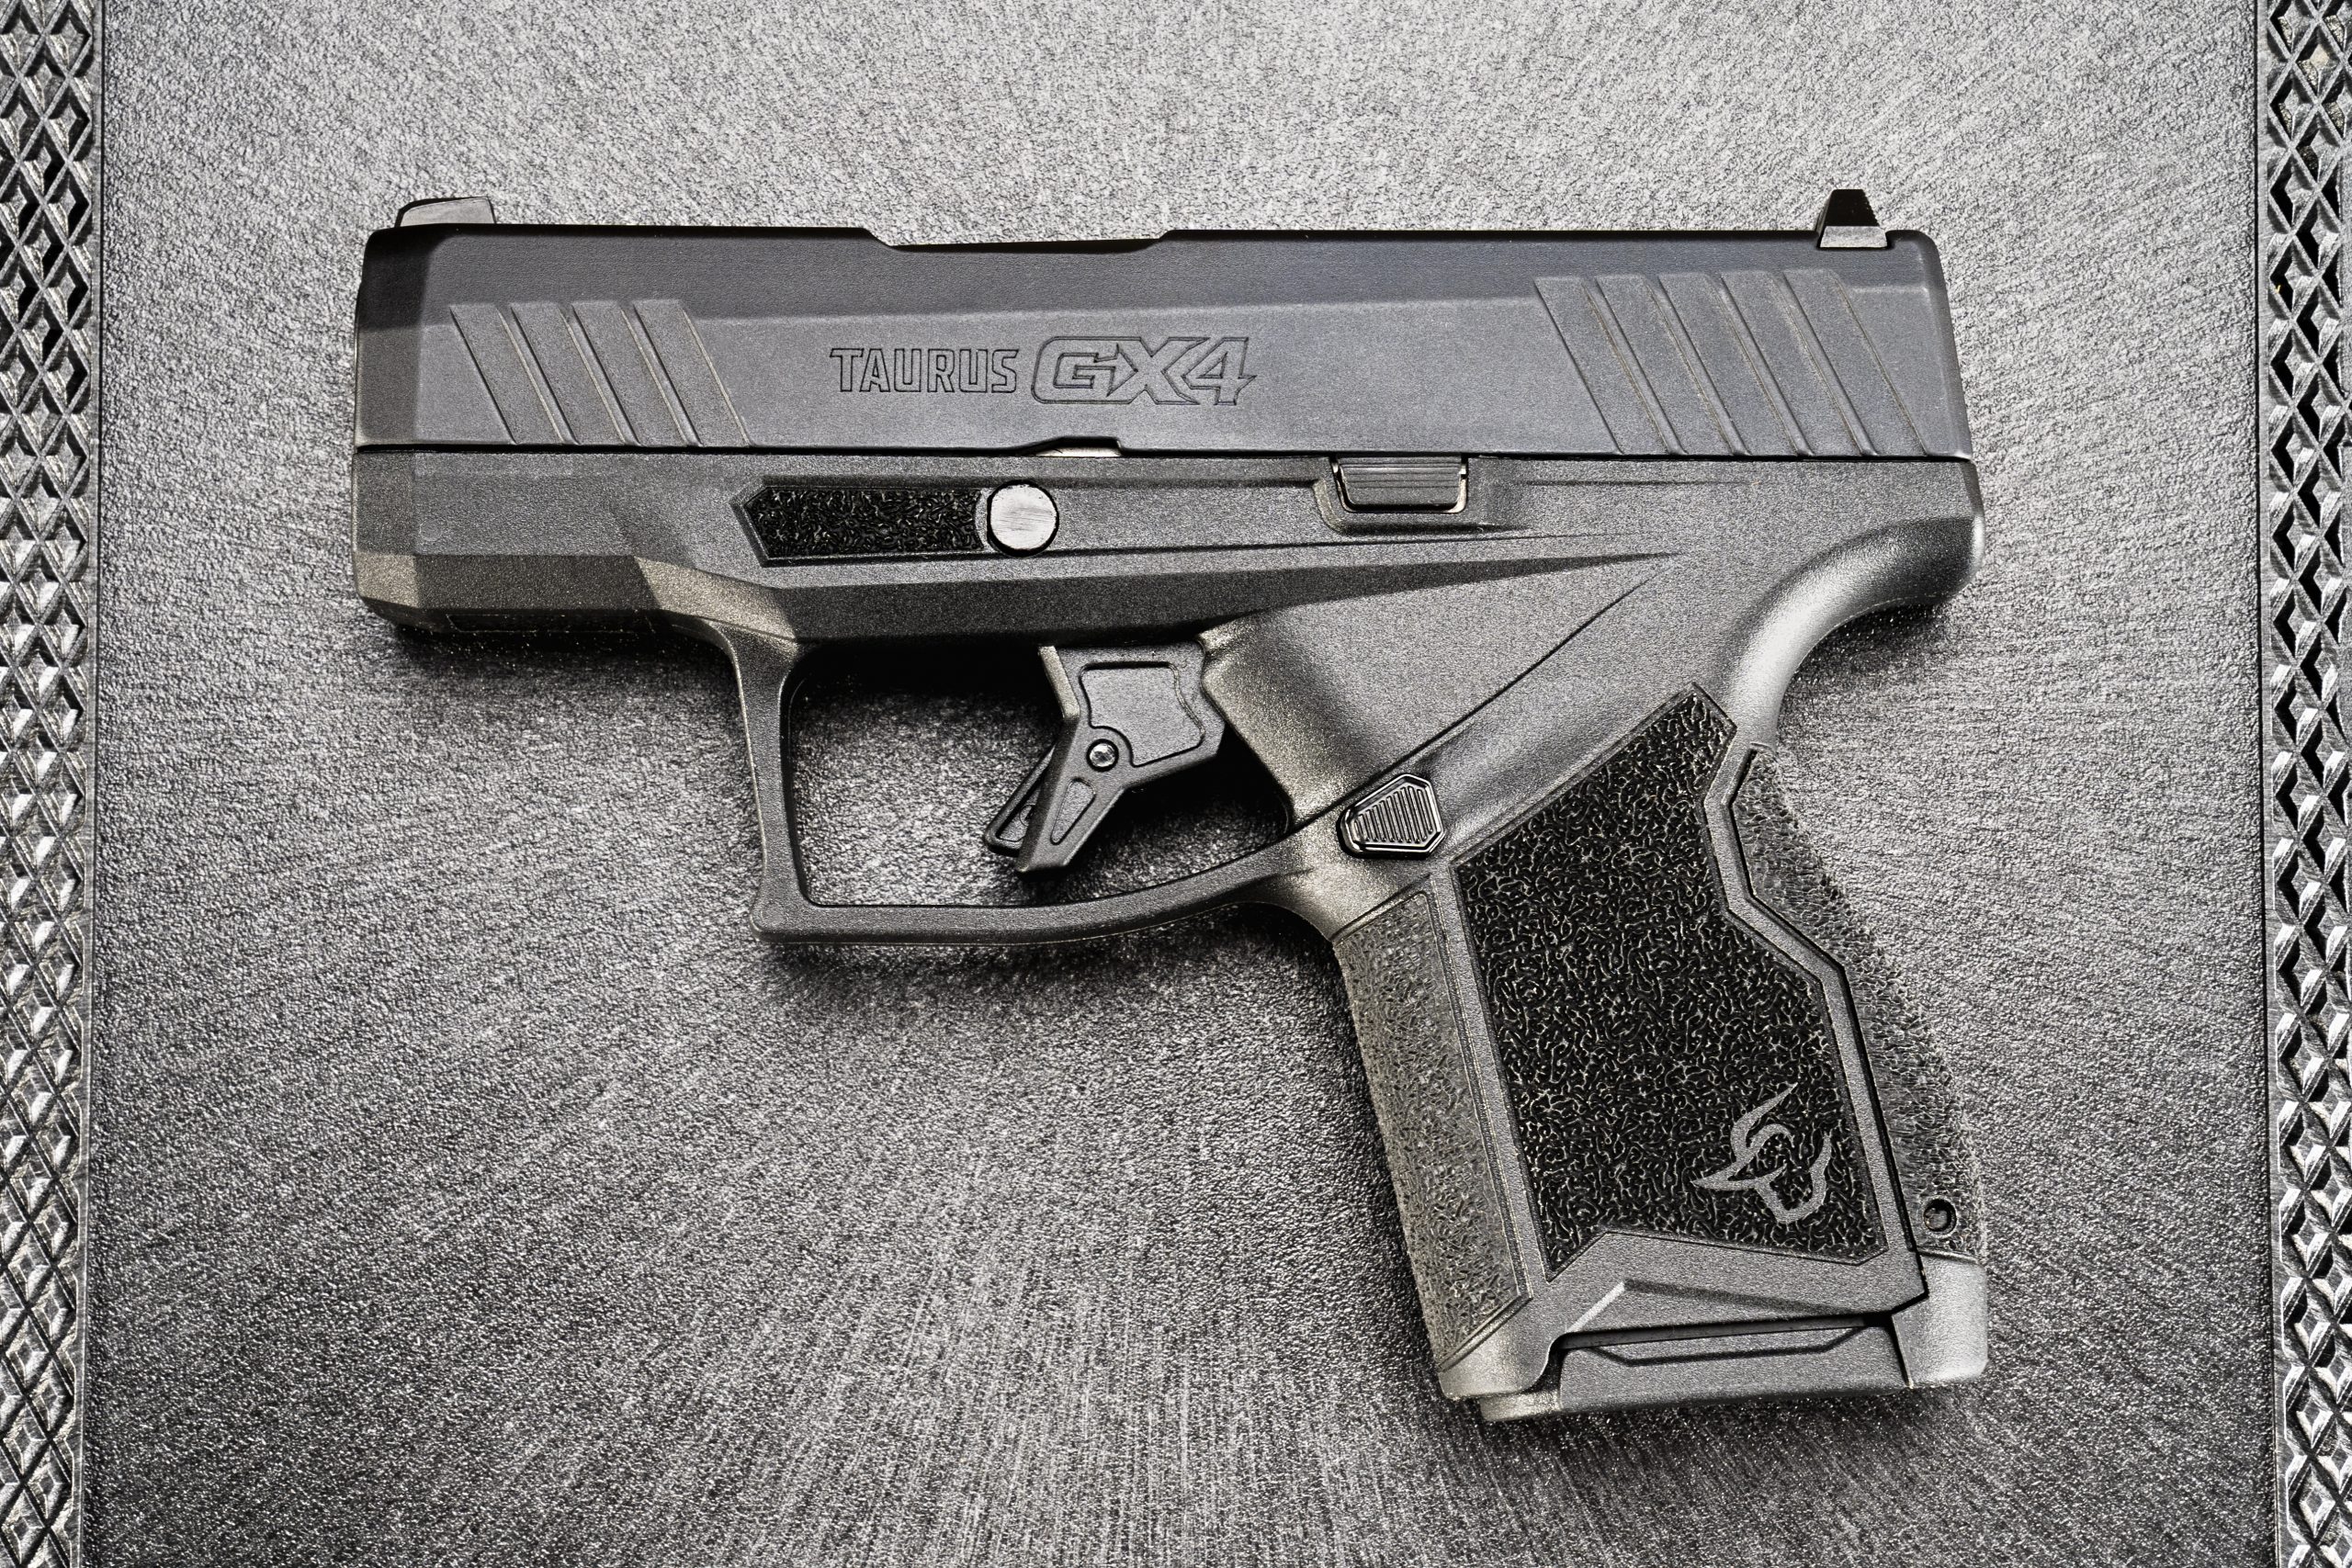 Taurus GX4 9mm subcompact concealed carry pistol